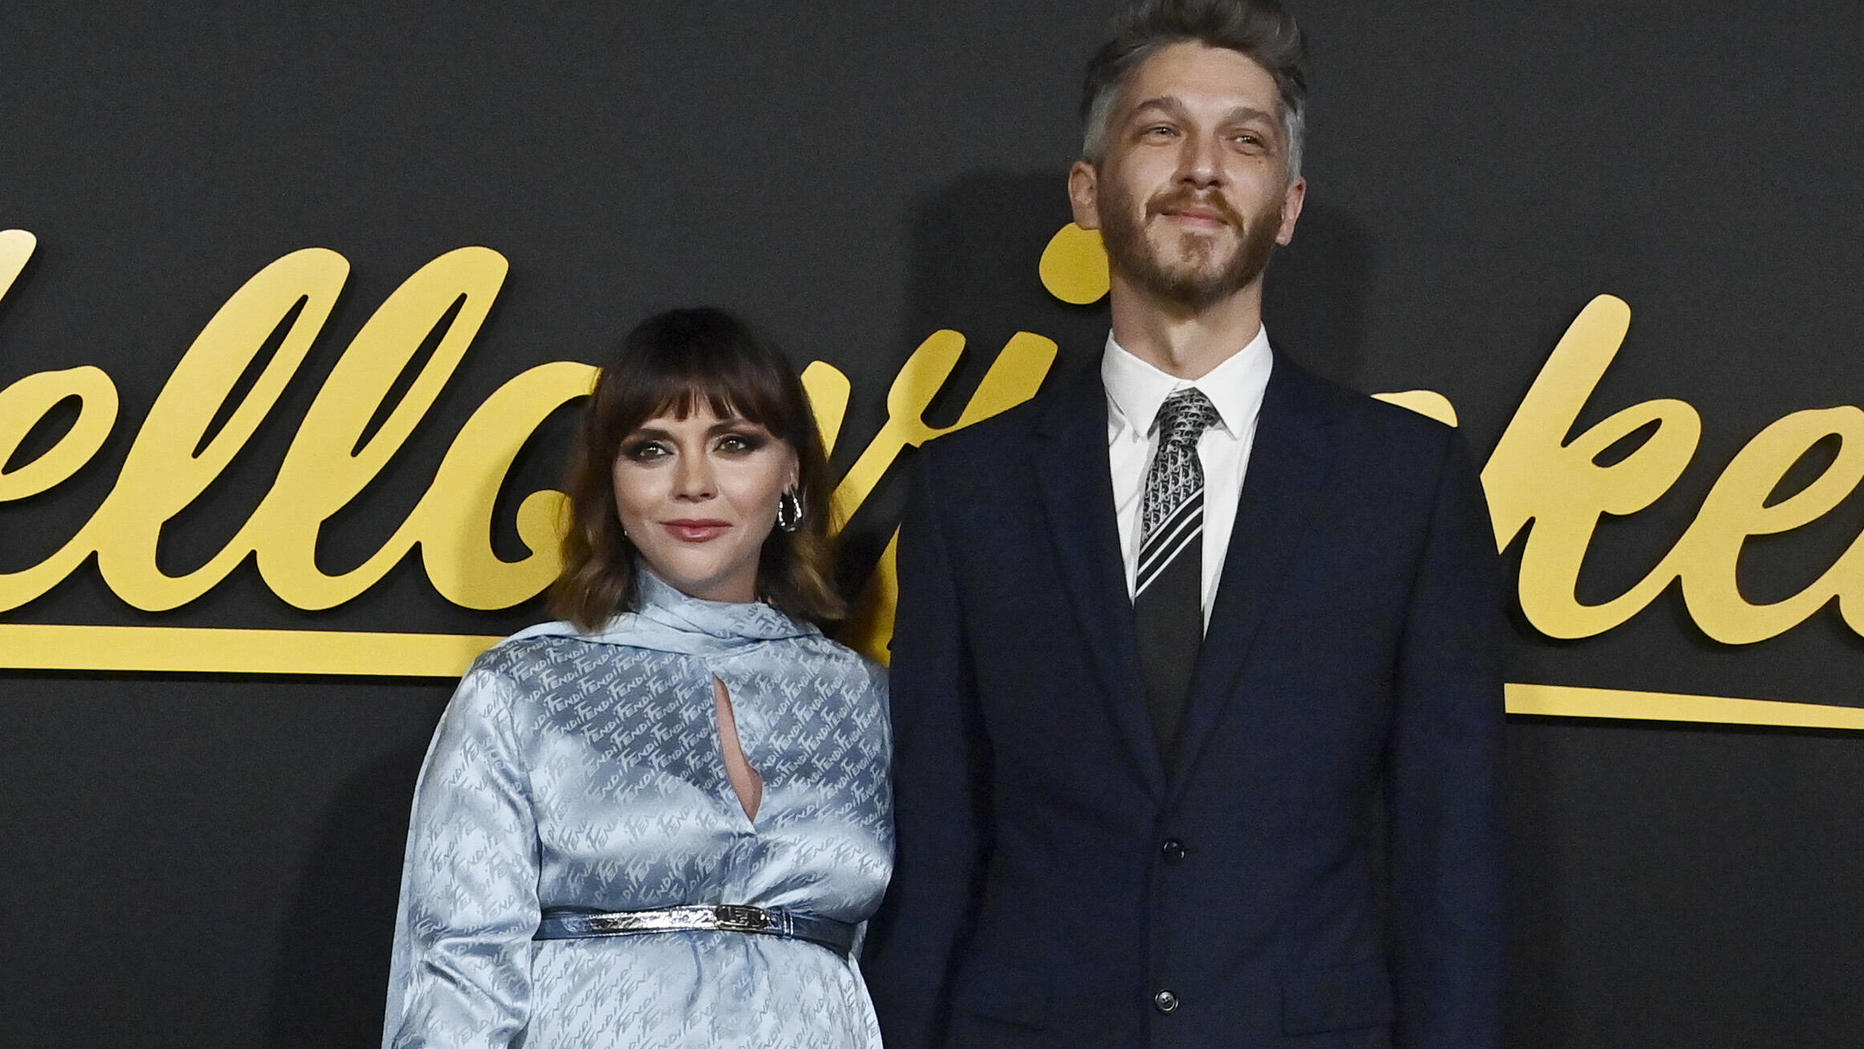  Cast member Christina Ricci and her husband Mark Hampton attend the premiere of Showtime s dramatic horror thriller TV series Yellowjackets at the Hollywood Legion Post 43 in Los Angeles on Wednesday, November 10, 2021. Storyline: A team of wildly t